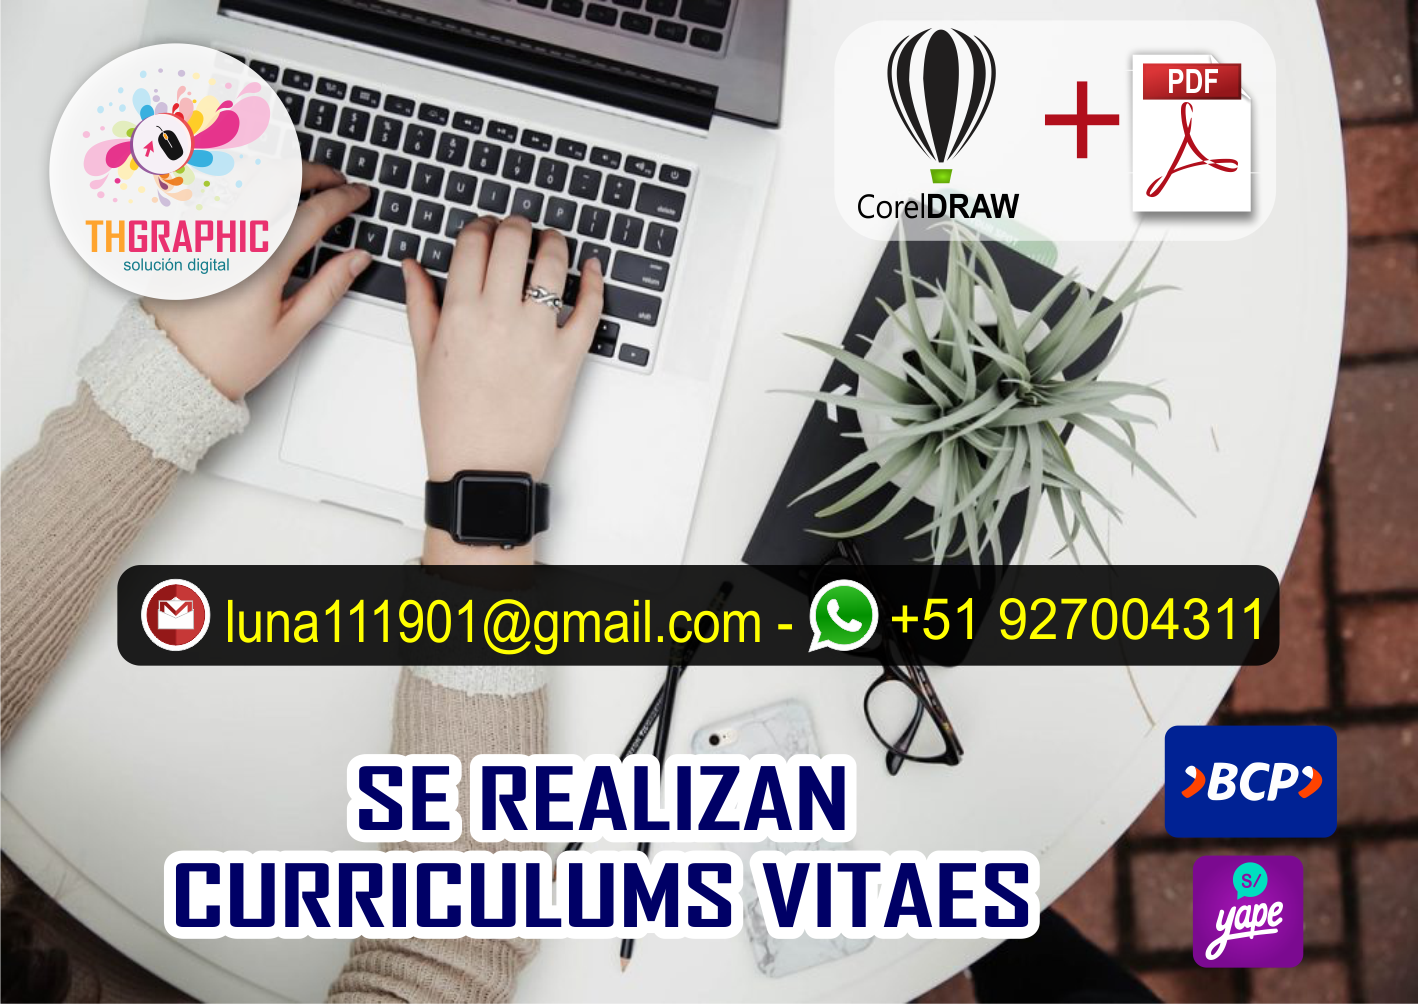 LP Vas . : ® + 5 Ae
GRAPHIC om “ wy,
A JURE

, if

      
   
  

ry
2)

SE Rextizan
&\ CURRICULUMS VITAES